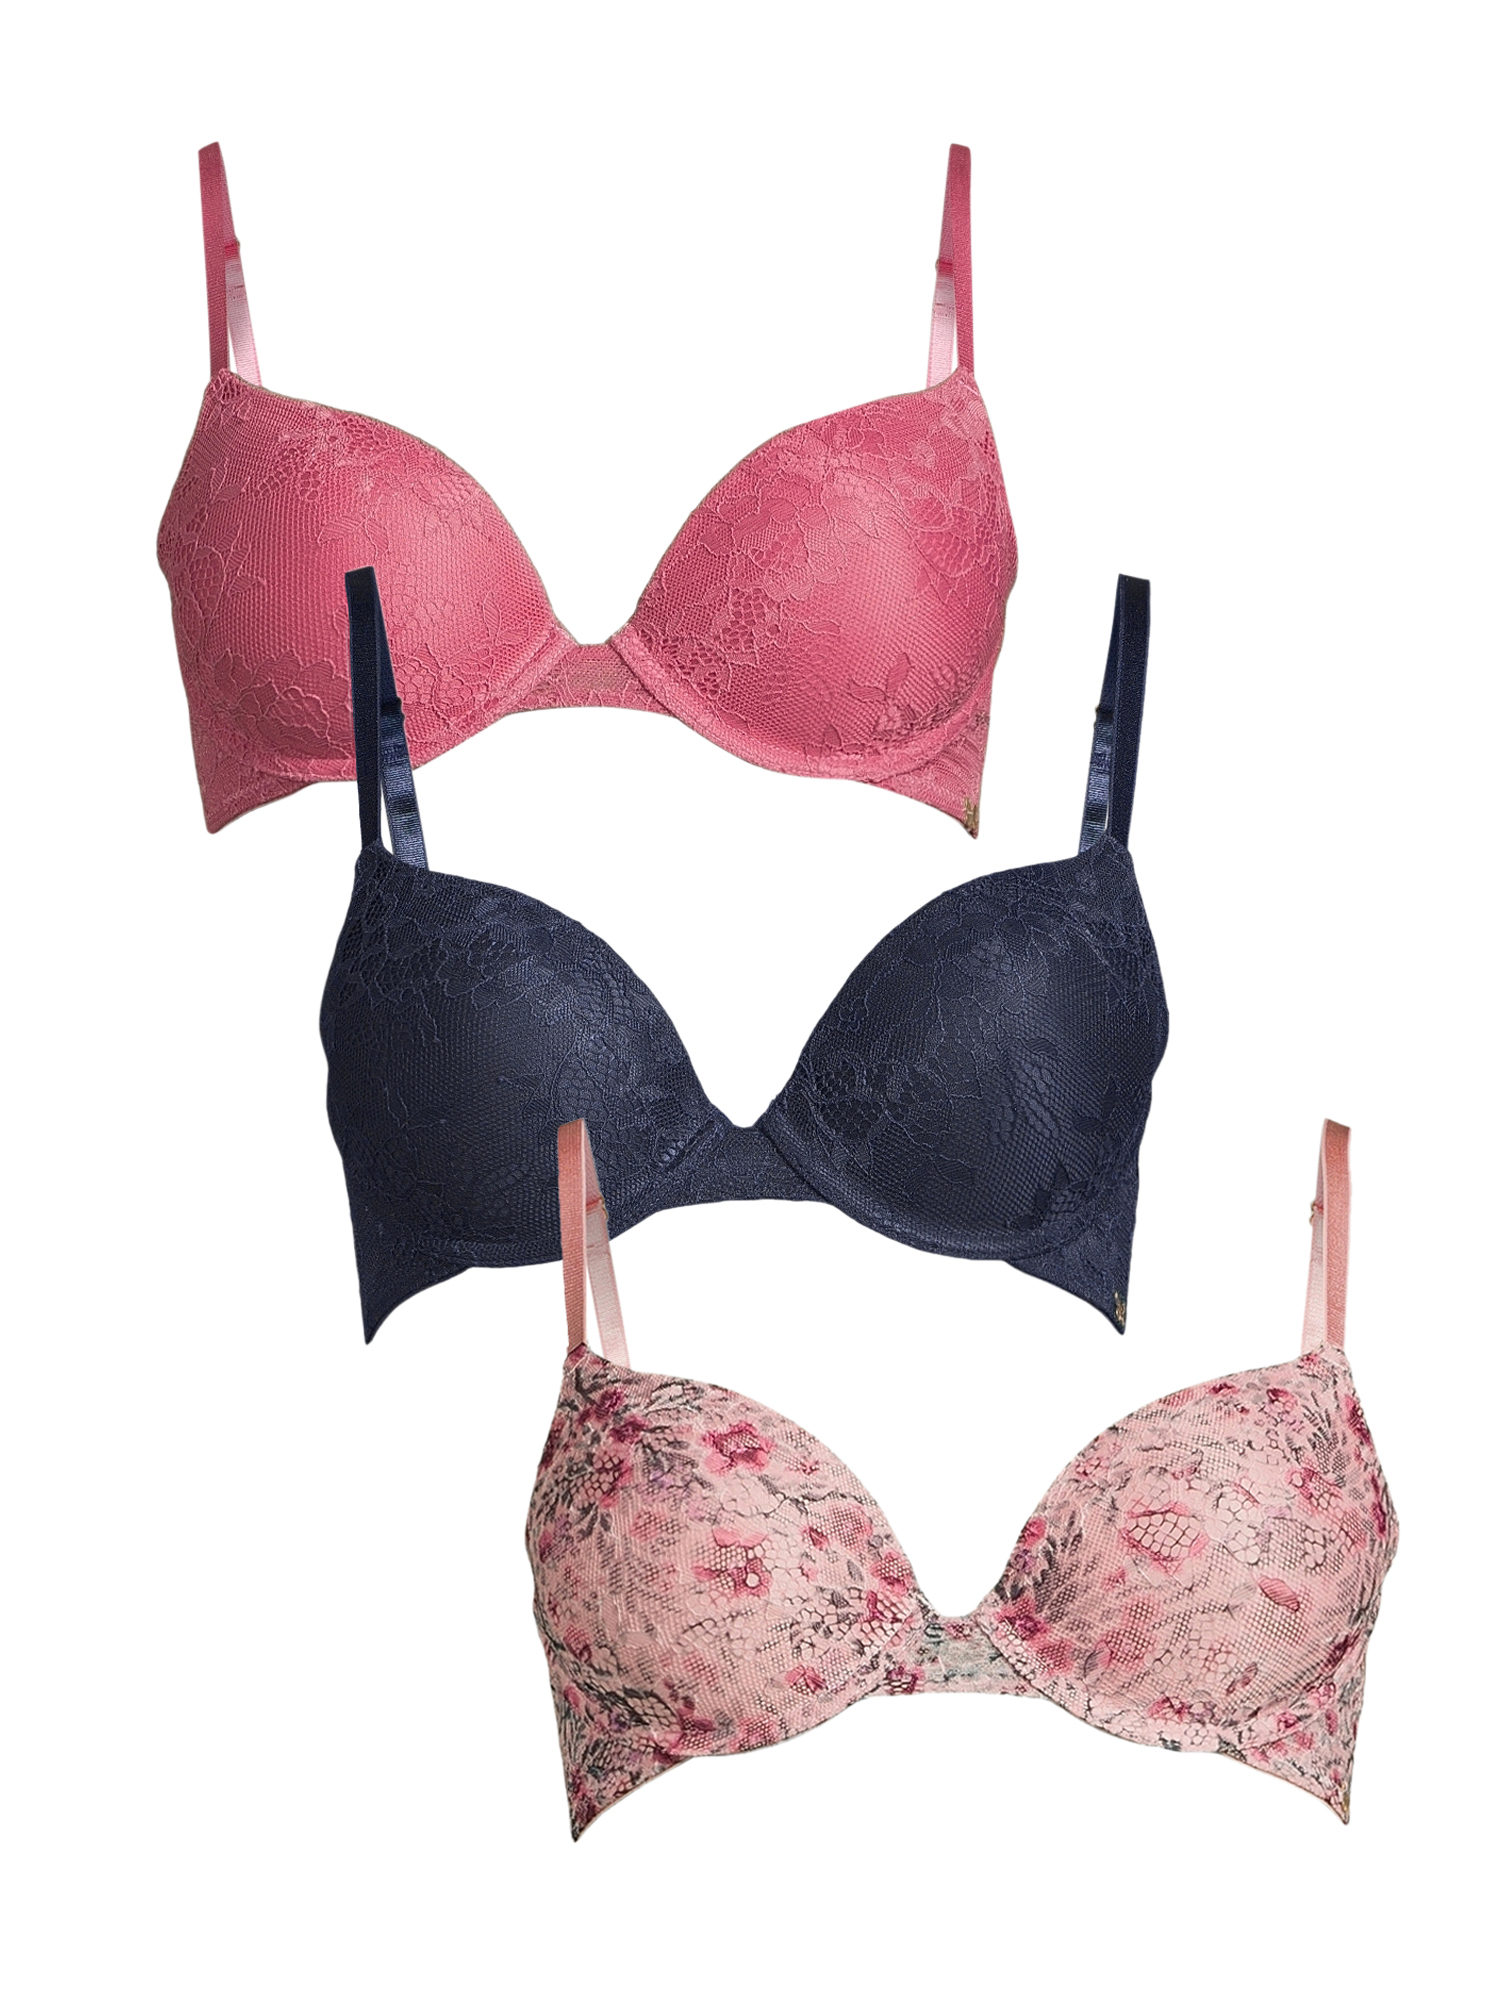 Jessica SimpsonWomen's Allover Lace Push-up Bra 3 Pack - image 1 of 3